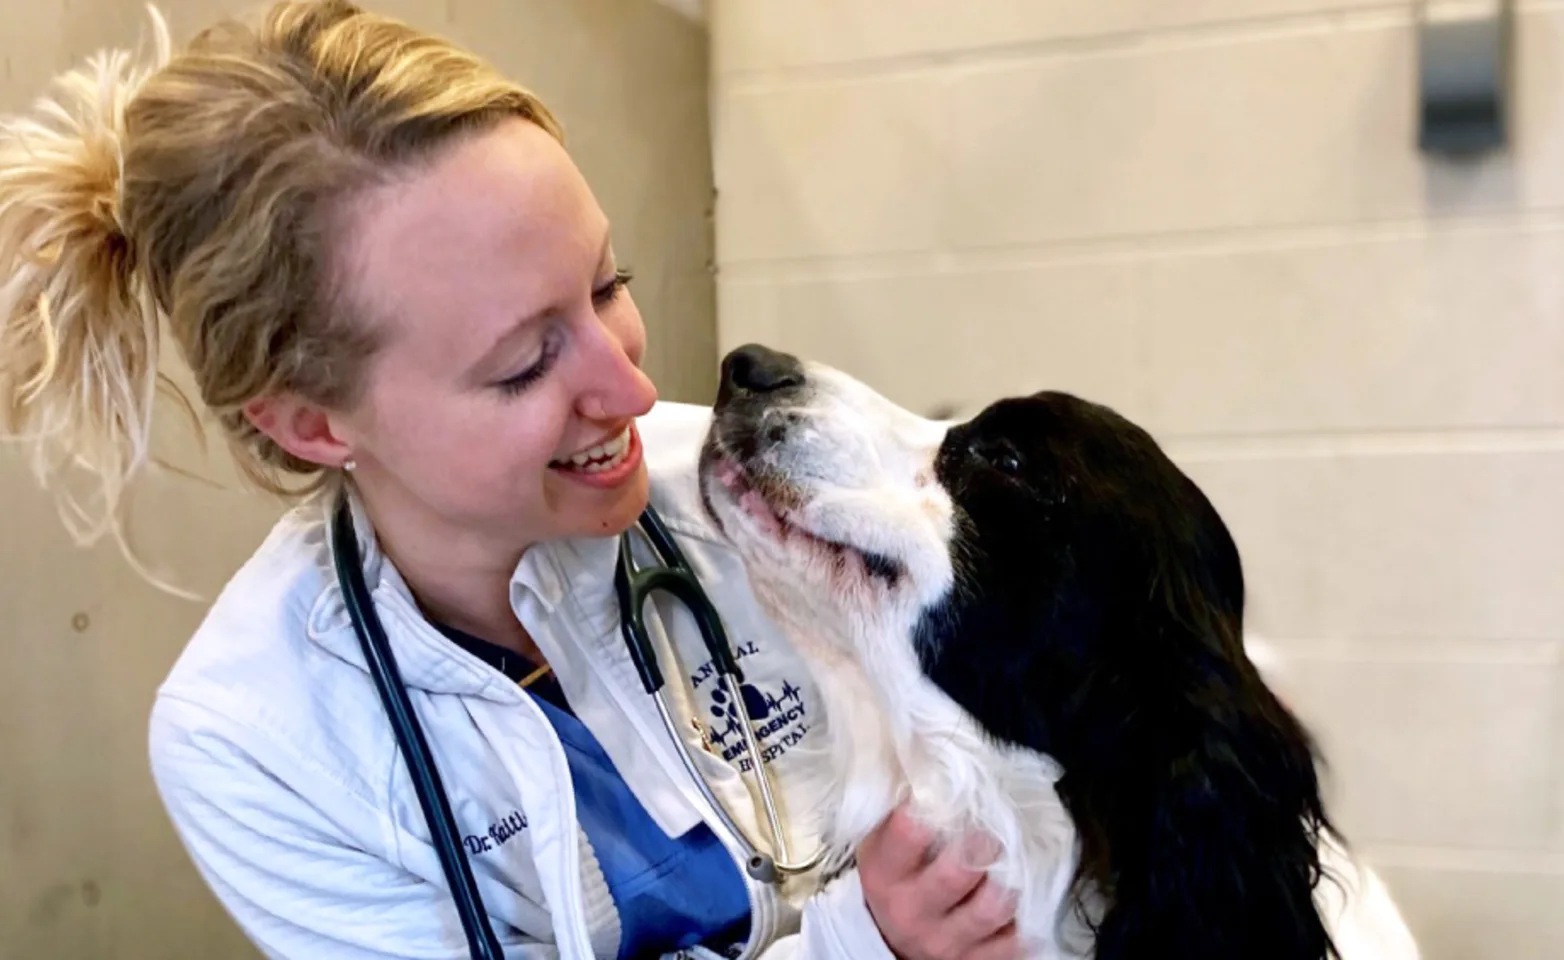 Staff with dog at Animal Emergency Hospital in Grand Rapids, MI